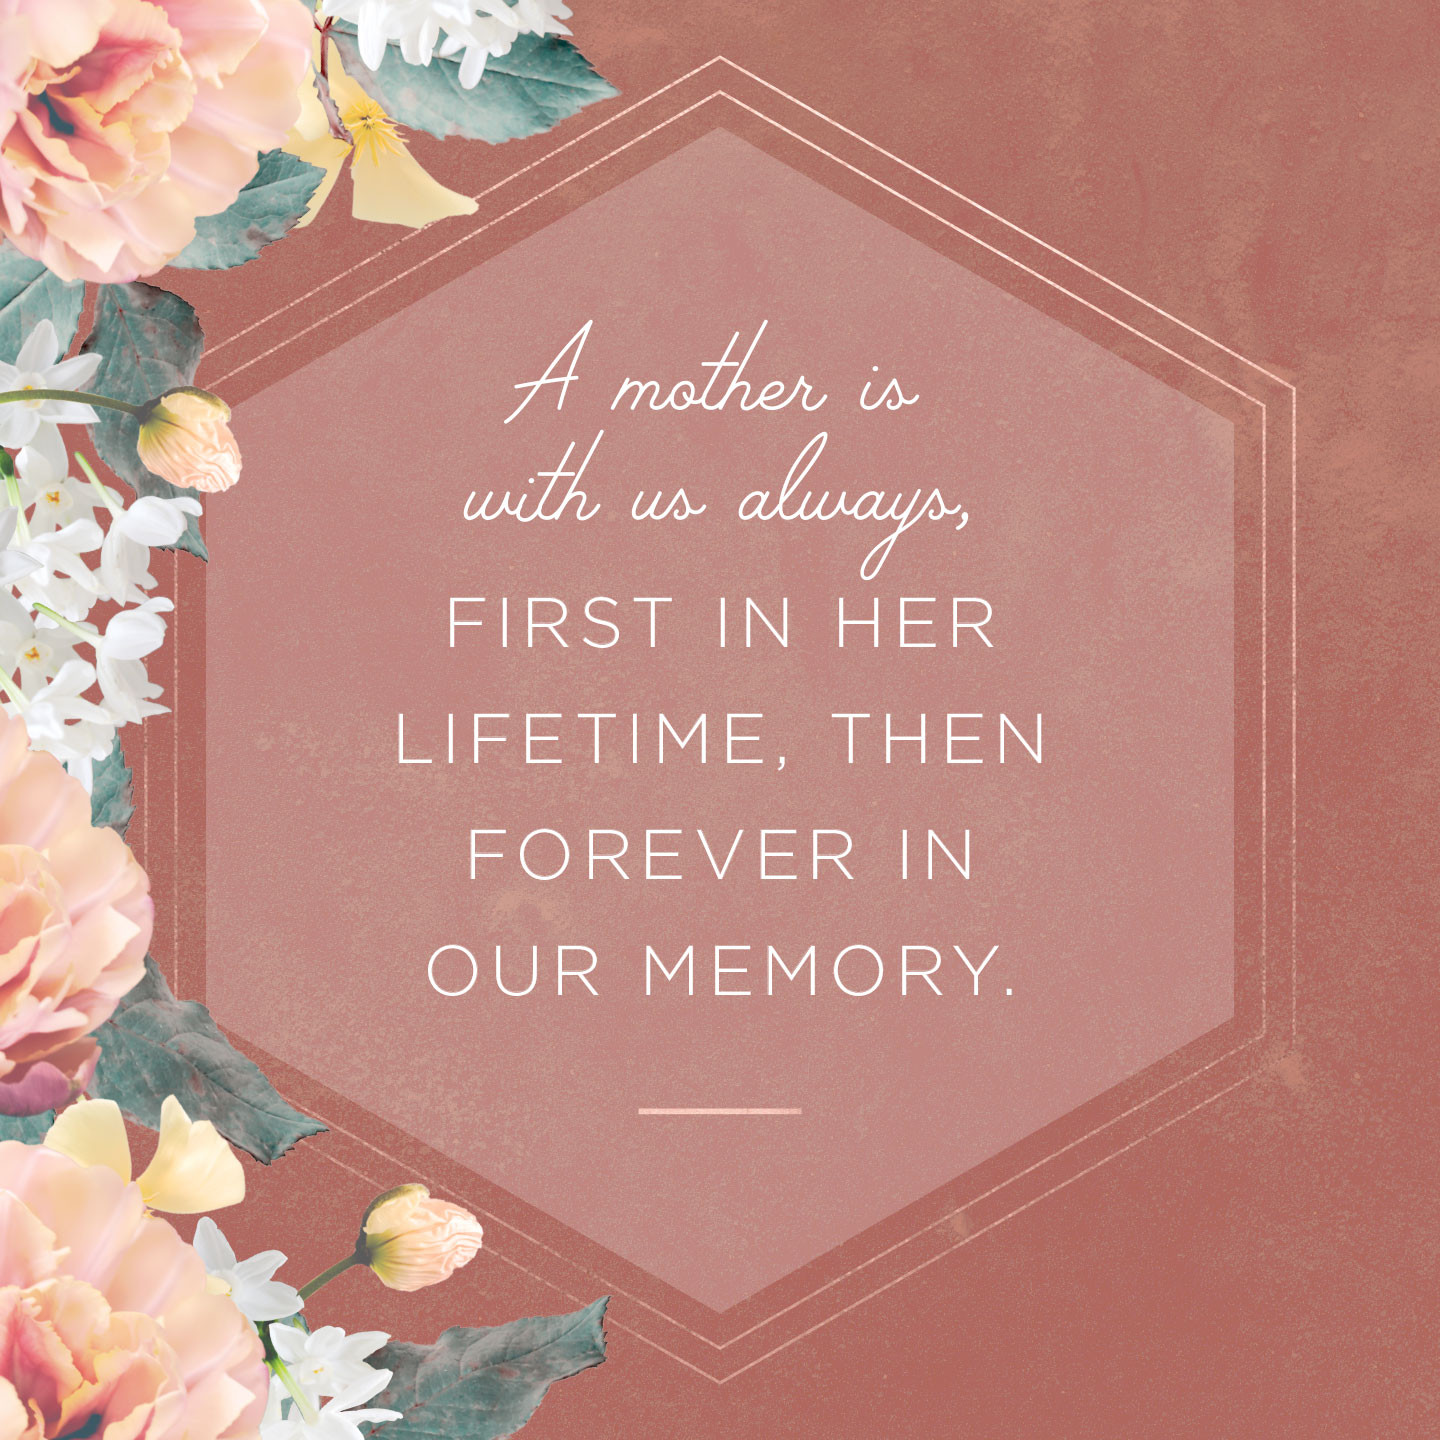 Condolences Quotes For Loss Of Family
 36 Sympathy Messages What to Write in a Condolence Card